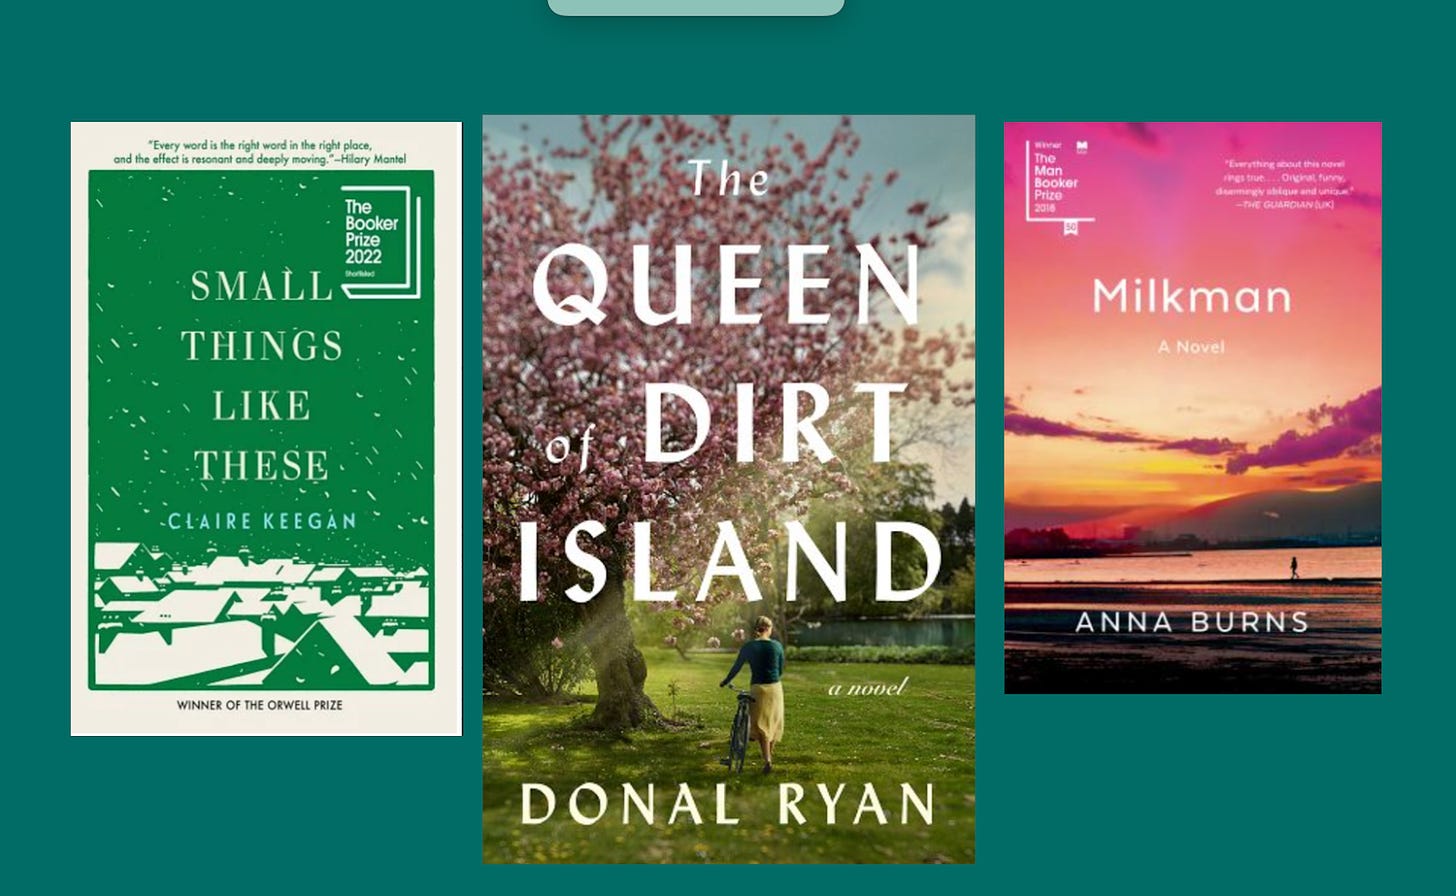 Covers of three books: small things like these, queen of dirt island, and Milkman